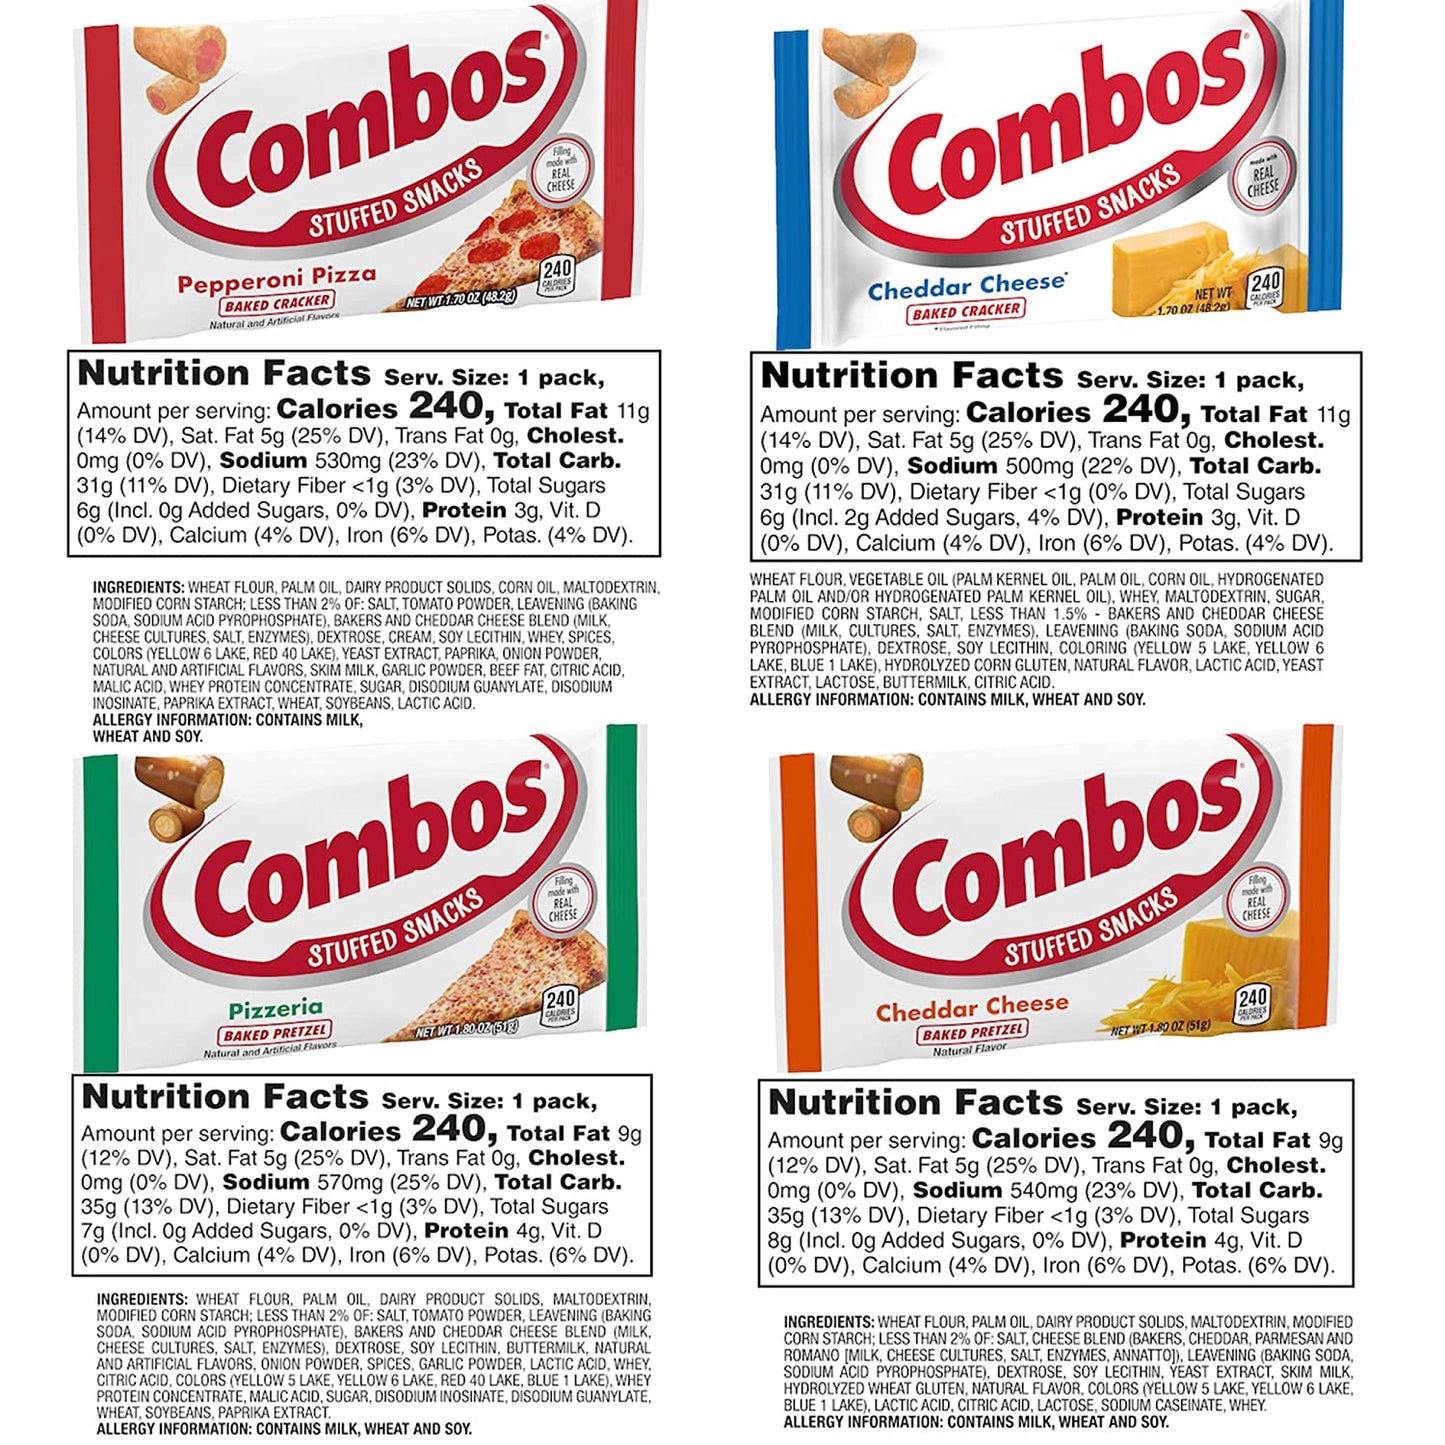 Combos Baked Snacks Variety Pack - Includes 16 Packs - 4 Of Each Flavor(Pepperoni Pizza Cracker, Cheddar Cheese Cracker, Pizzeria Pretzel, Cheddar Cheese Pretzel) - 1.8/1.7 Ounces Each - With Mighty Merchandise Bag Clip